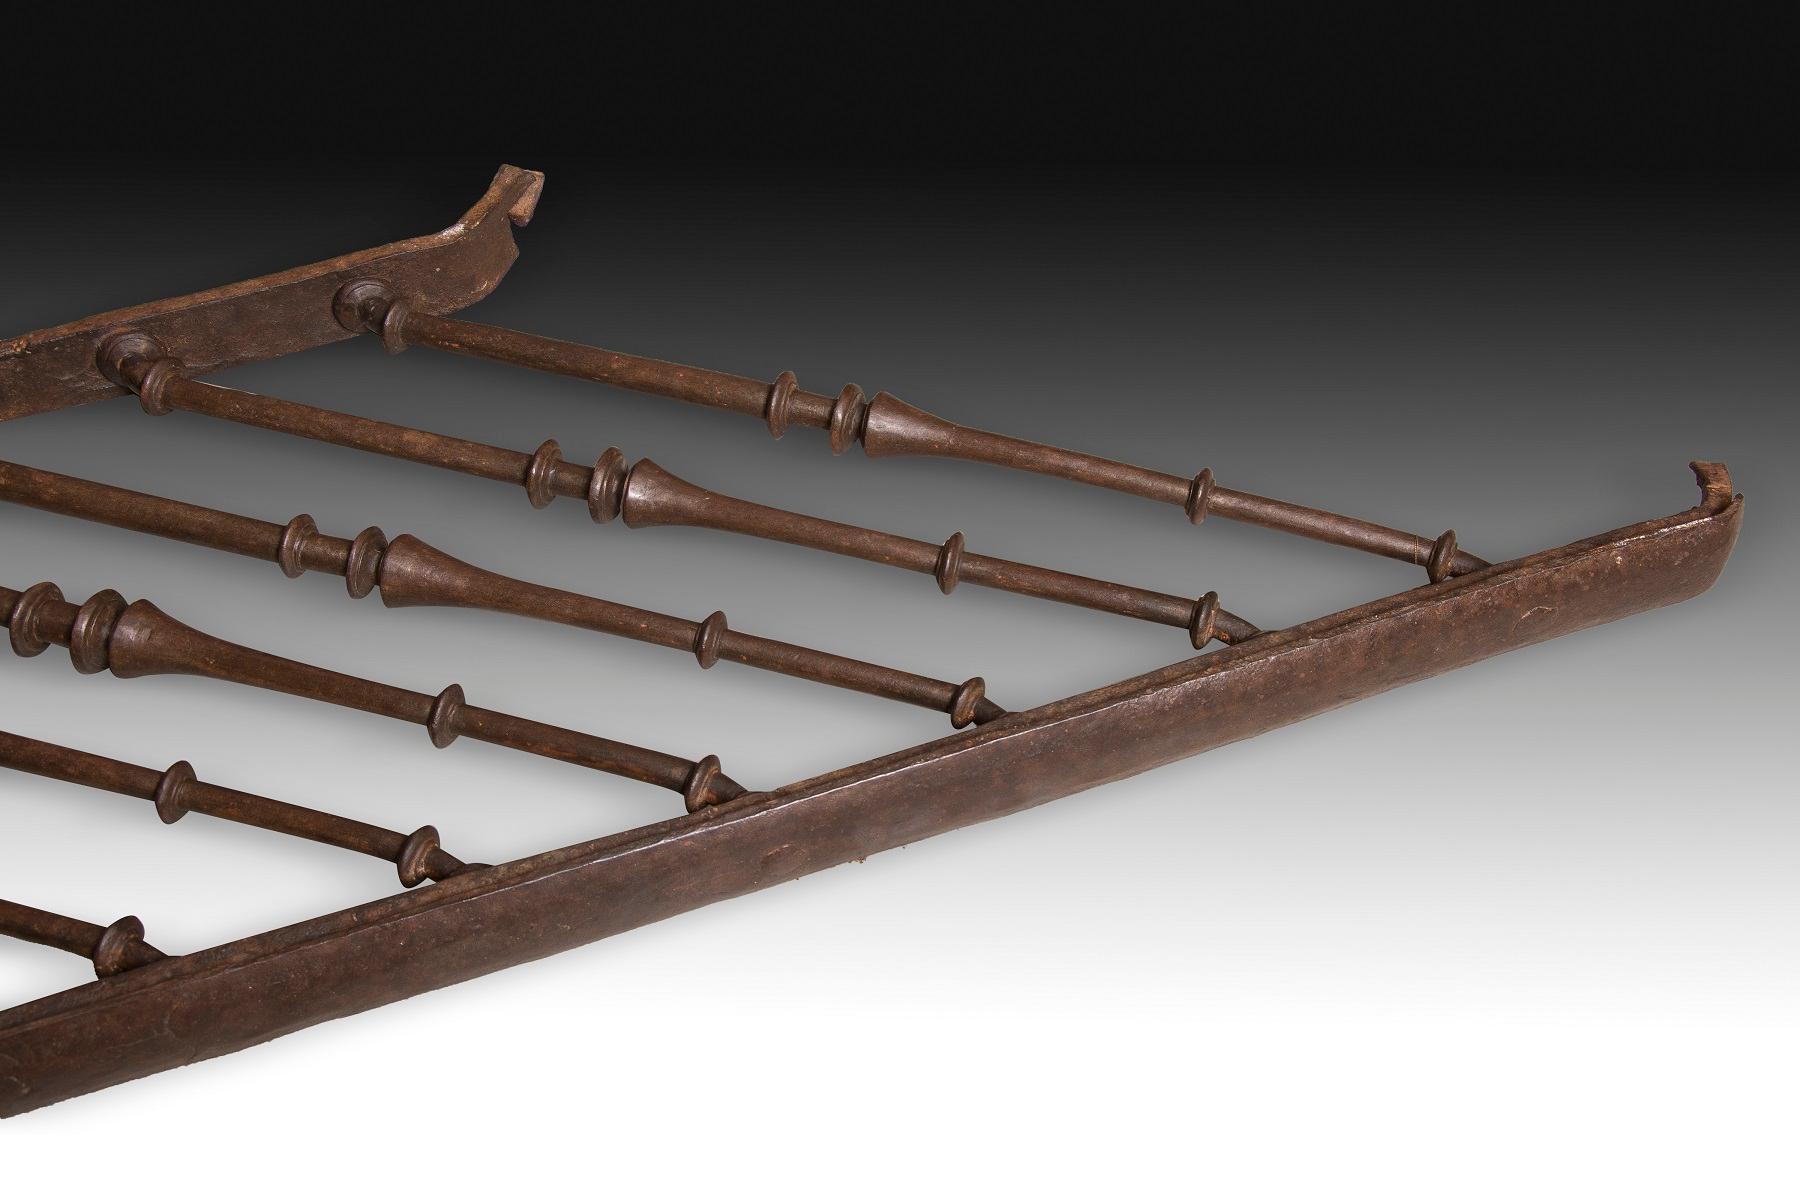 European Railing with Banisters, Wrought Iron, 16th Century